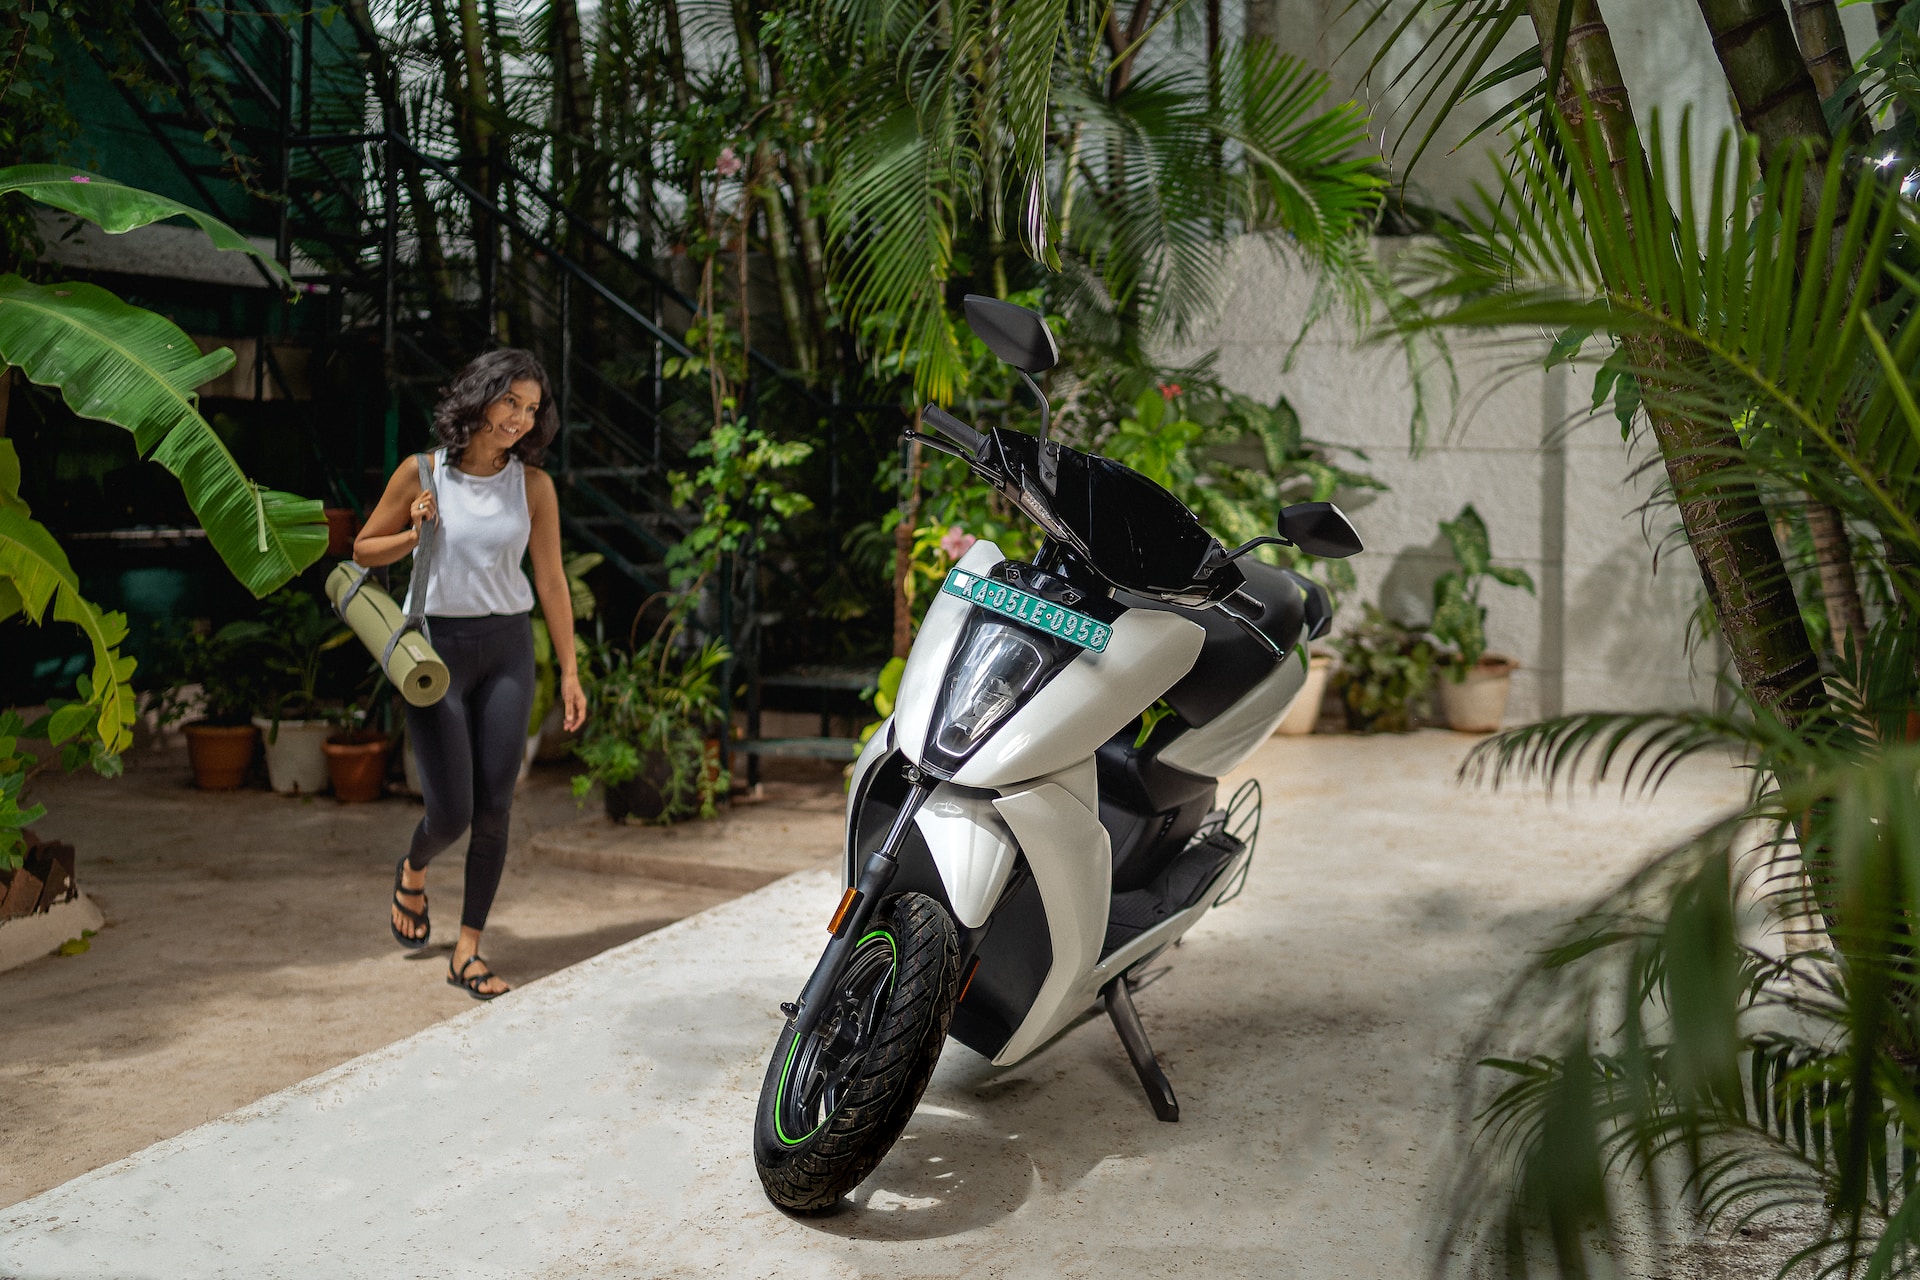 A photograph of a woman walking across a driveway towards an electric motorcycle.